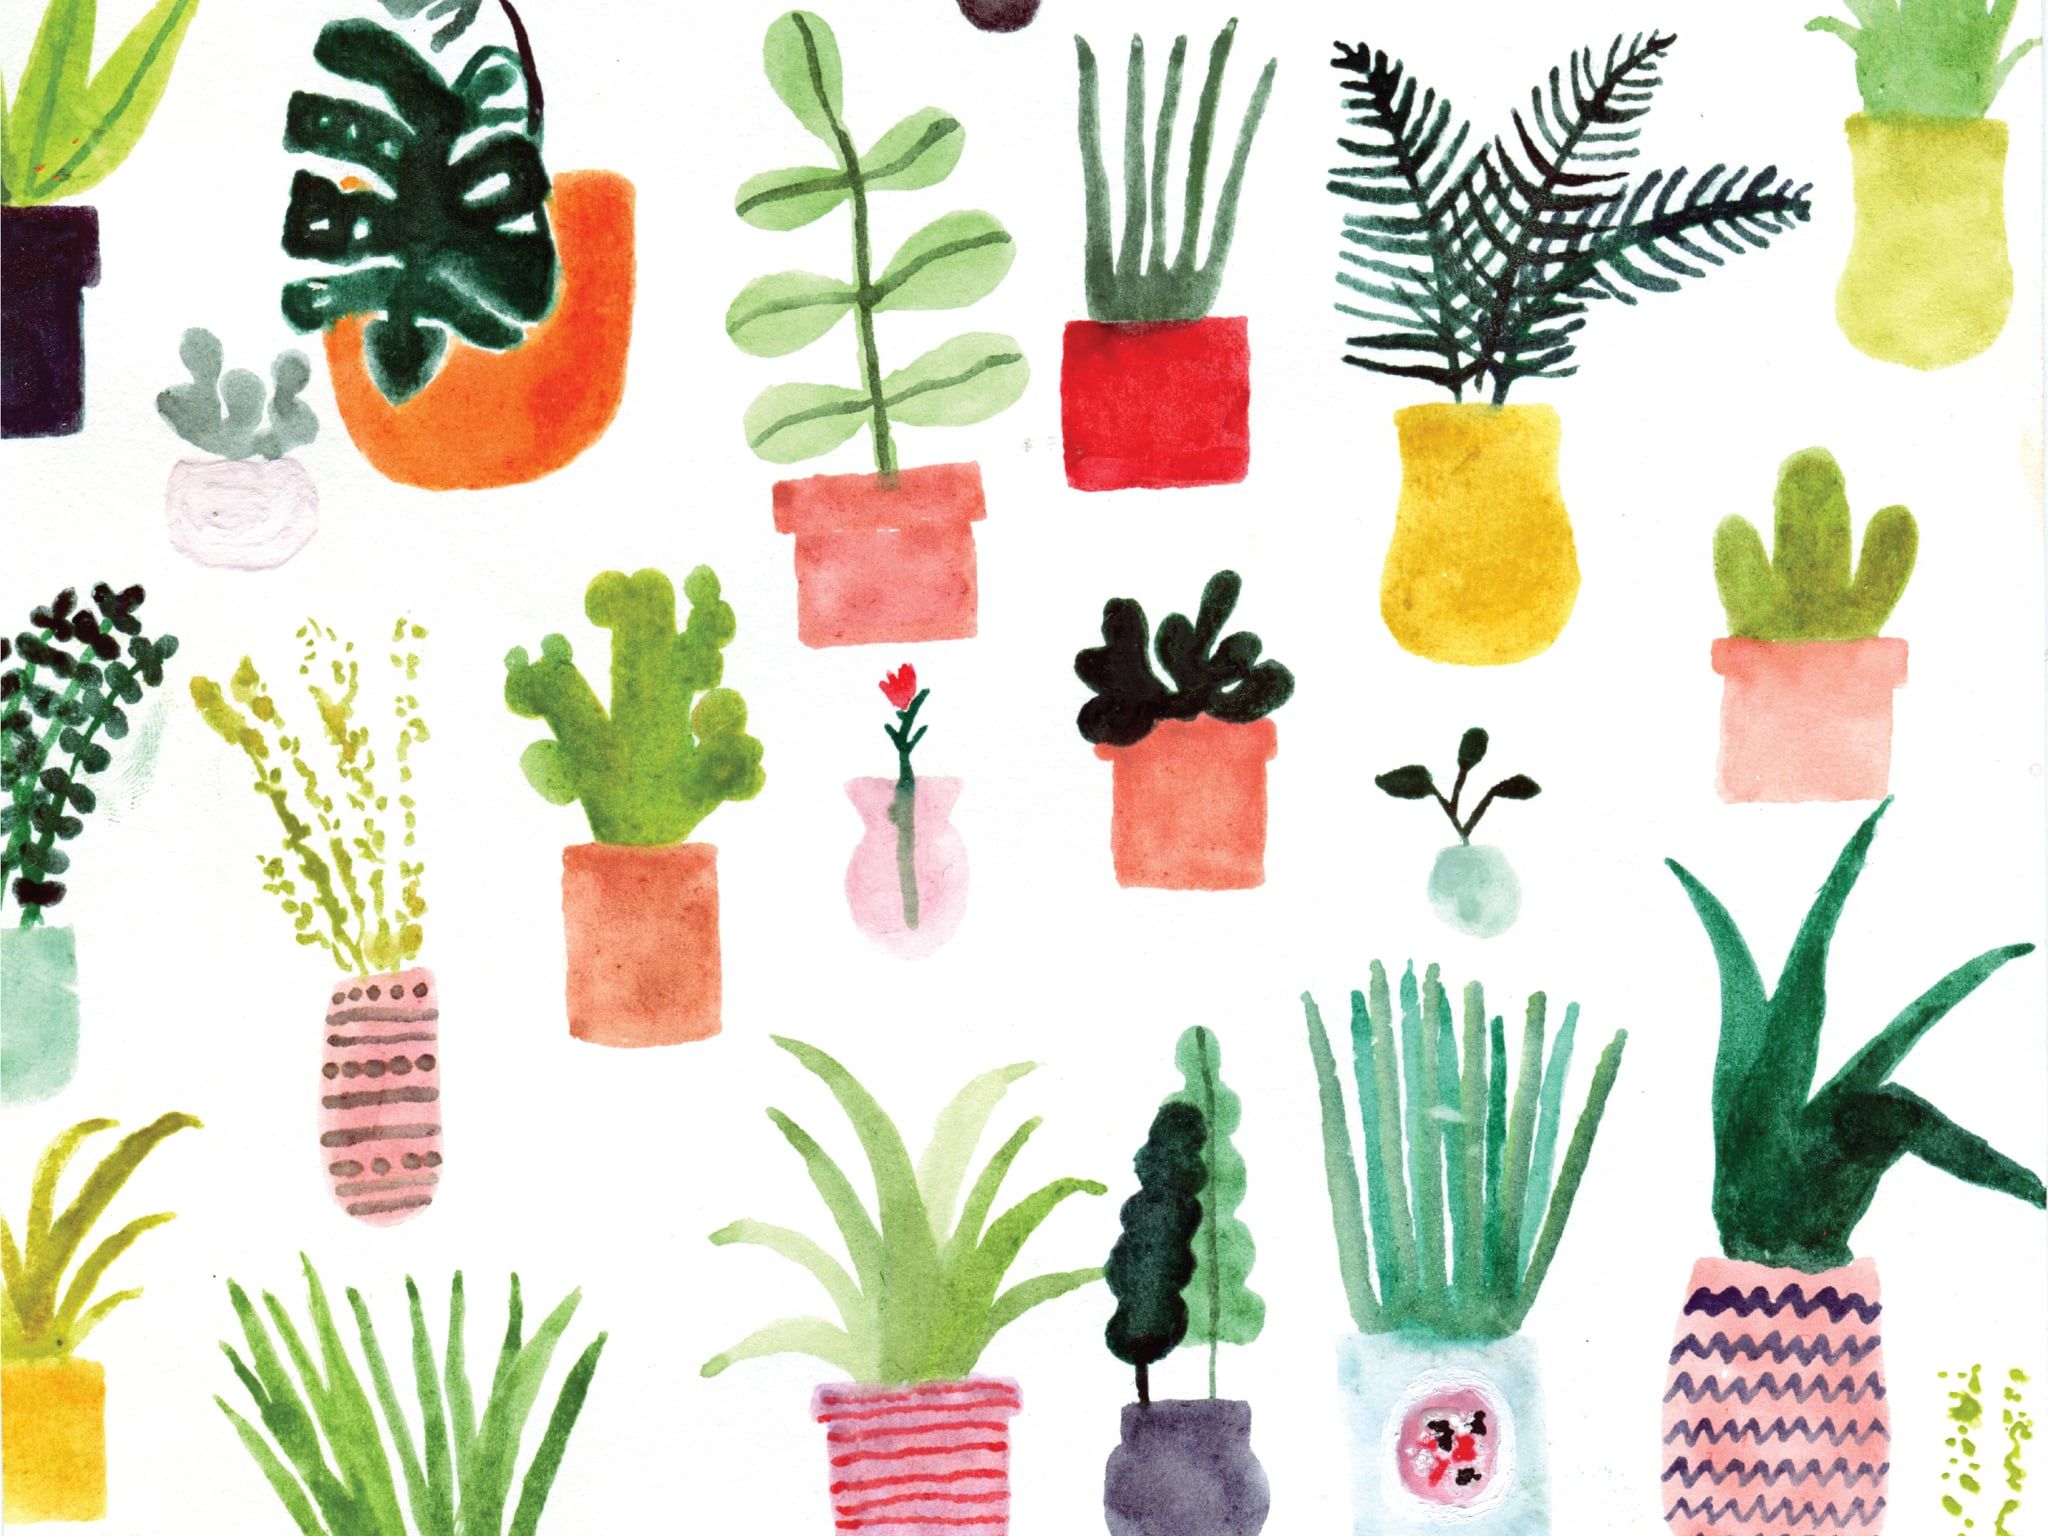 Plants by ban.do. Free and Fabulous Desktop Wallpaper For Spring